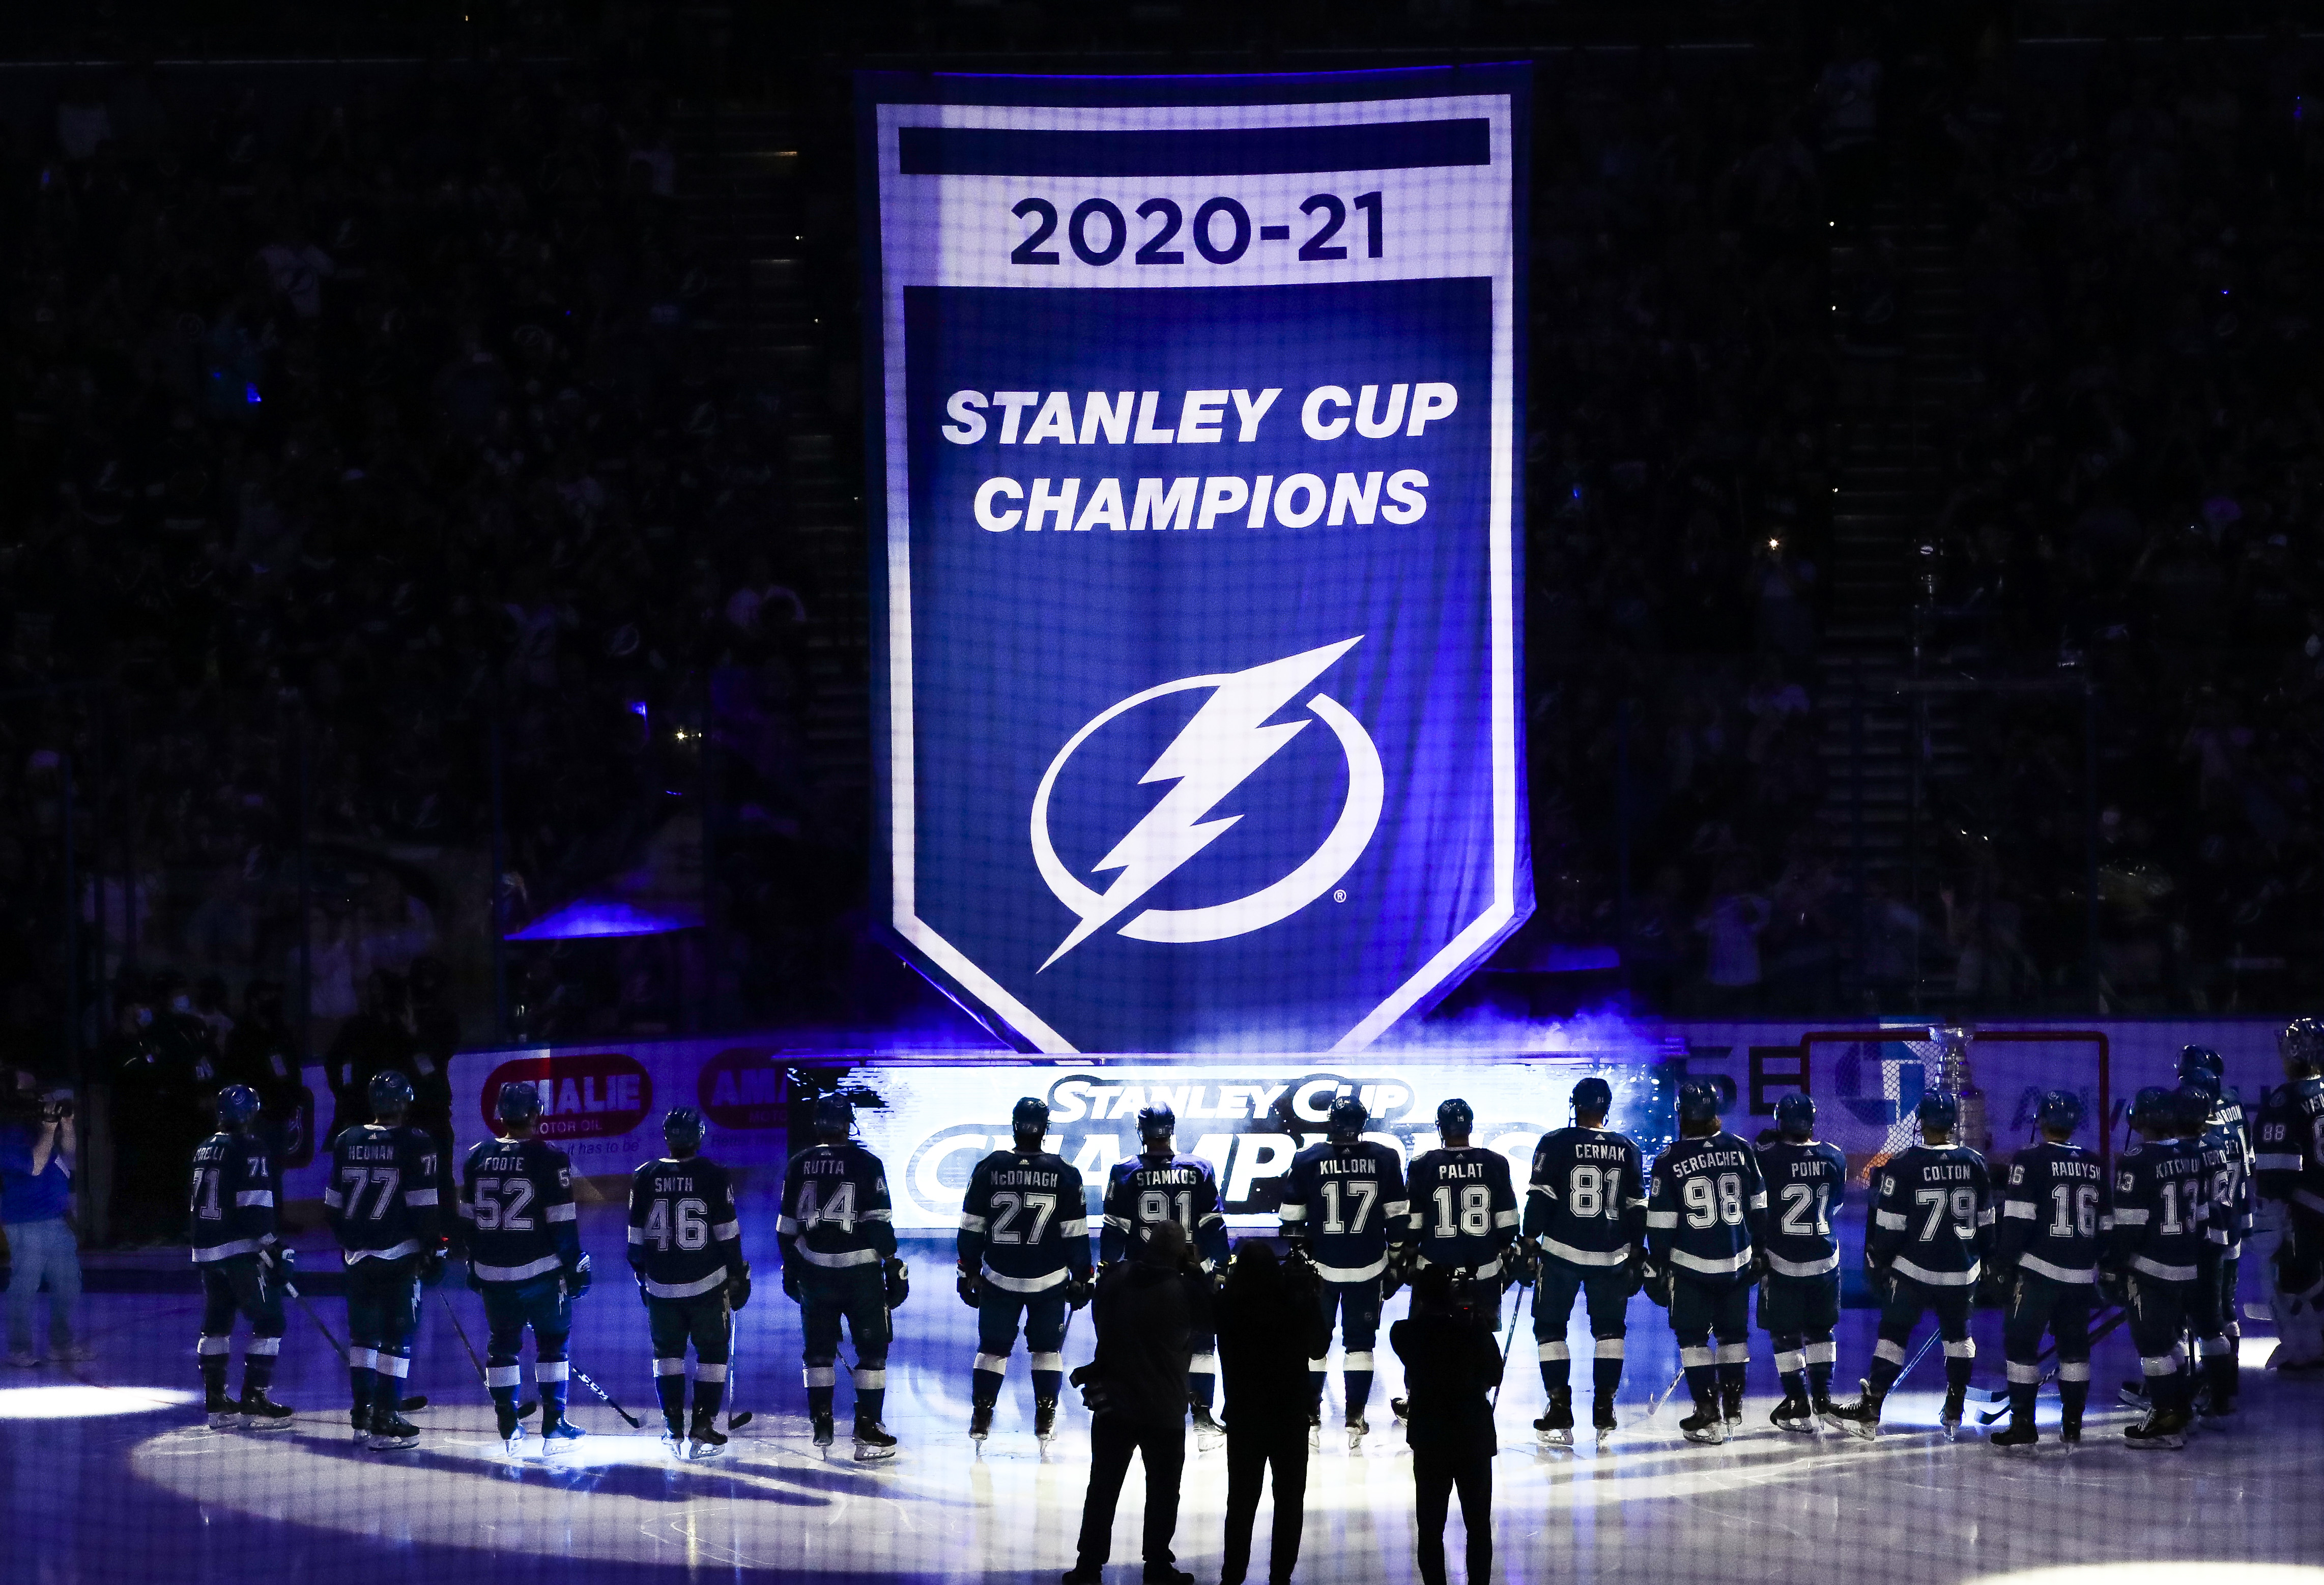 National Emblem 2020 NHL Stanley Cup Final Champions Tampa Bay Lightning Banner Jersey Patch